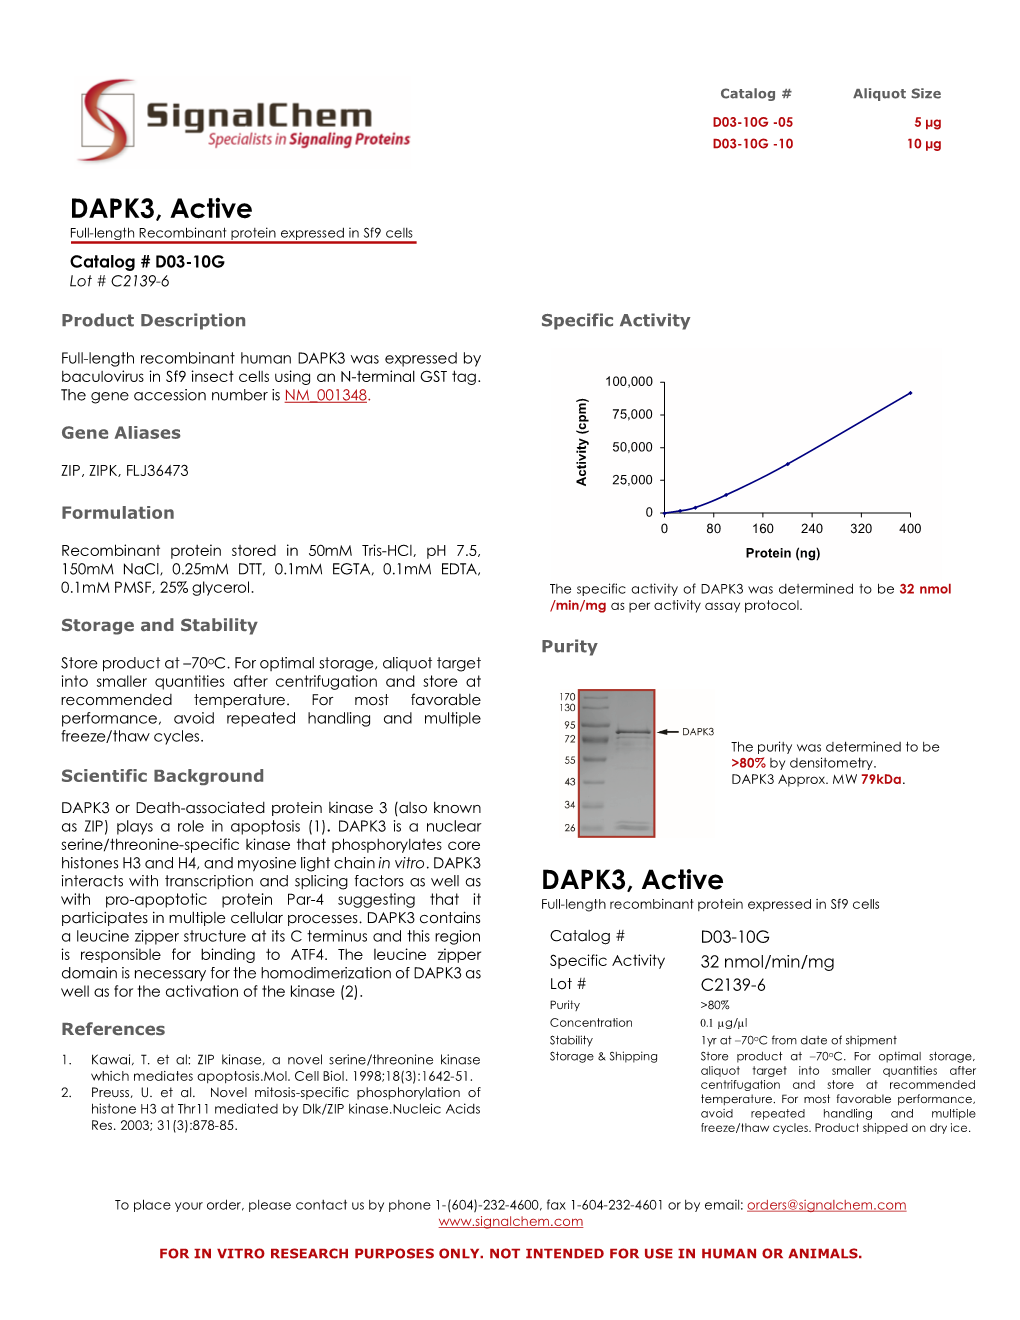 DAPK3, Active Full-Length Recombinant Protein Expressed in Sf9 Cells